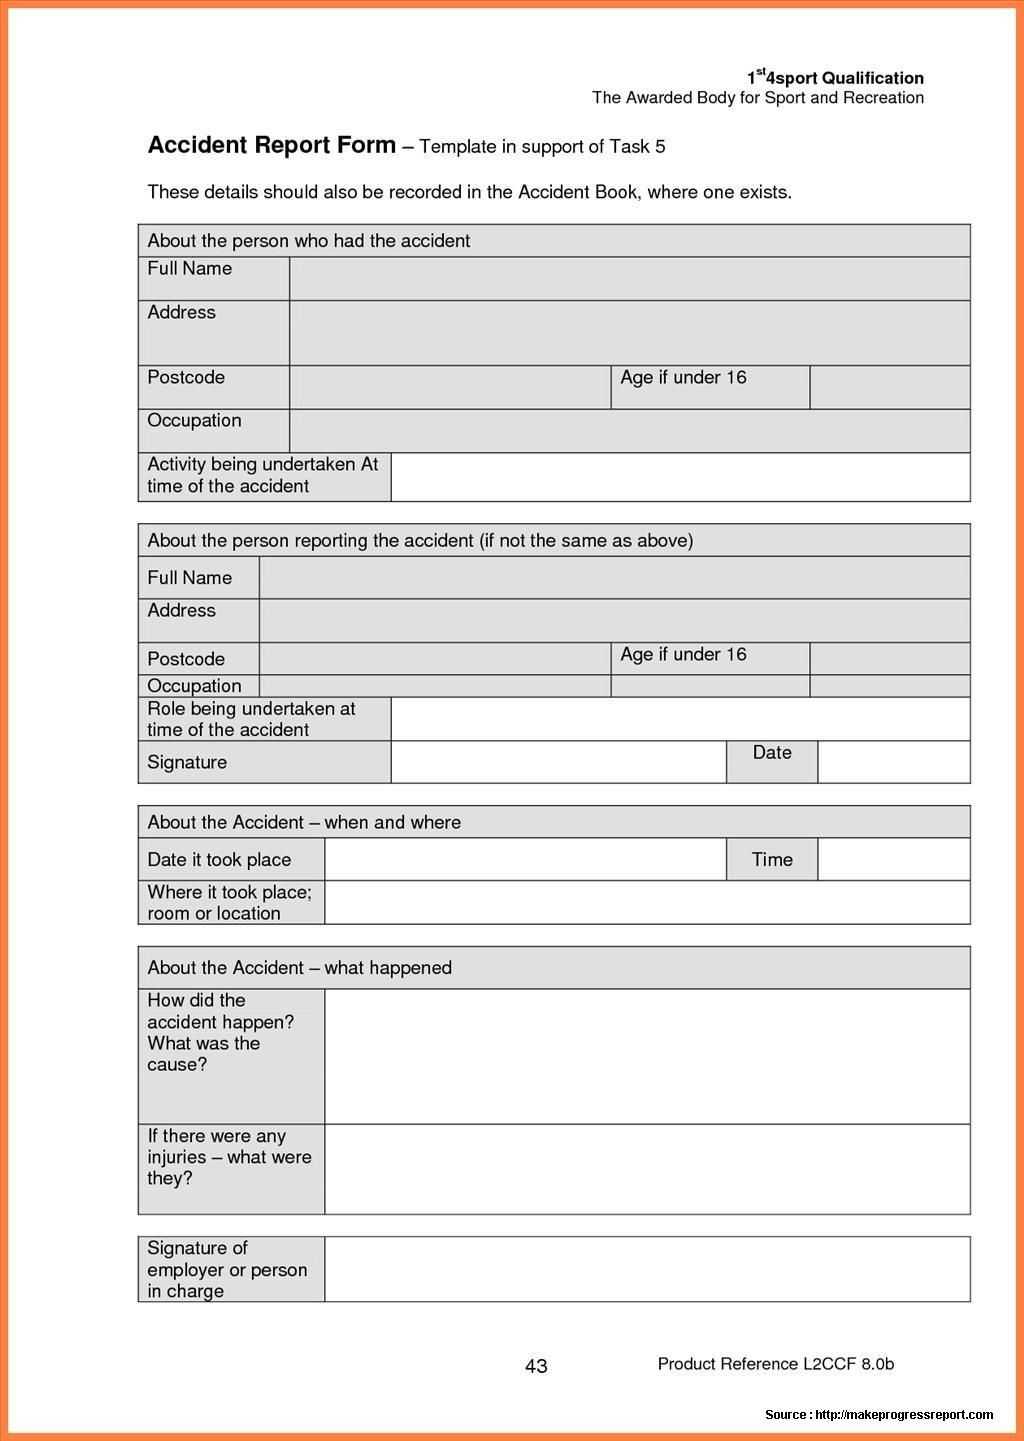 003 Accident Report Form Templates Template Ideas Unusual Regarding Vehicle Accident Report Form Template